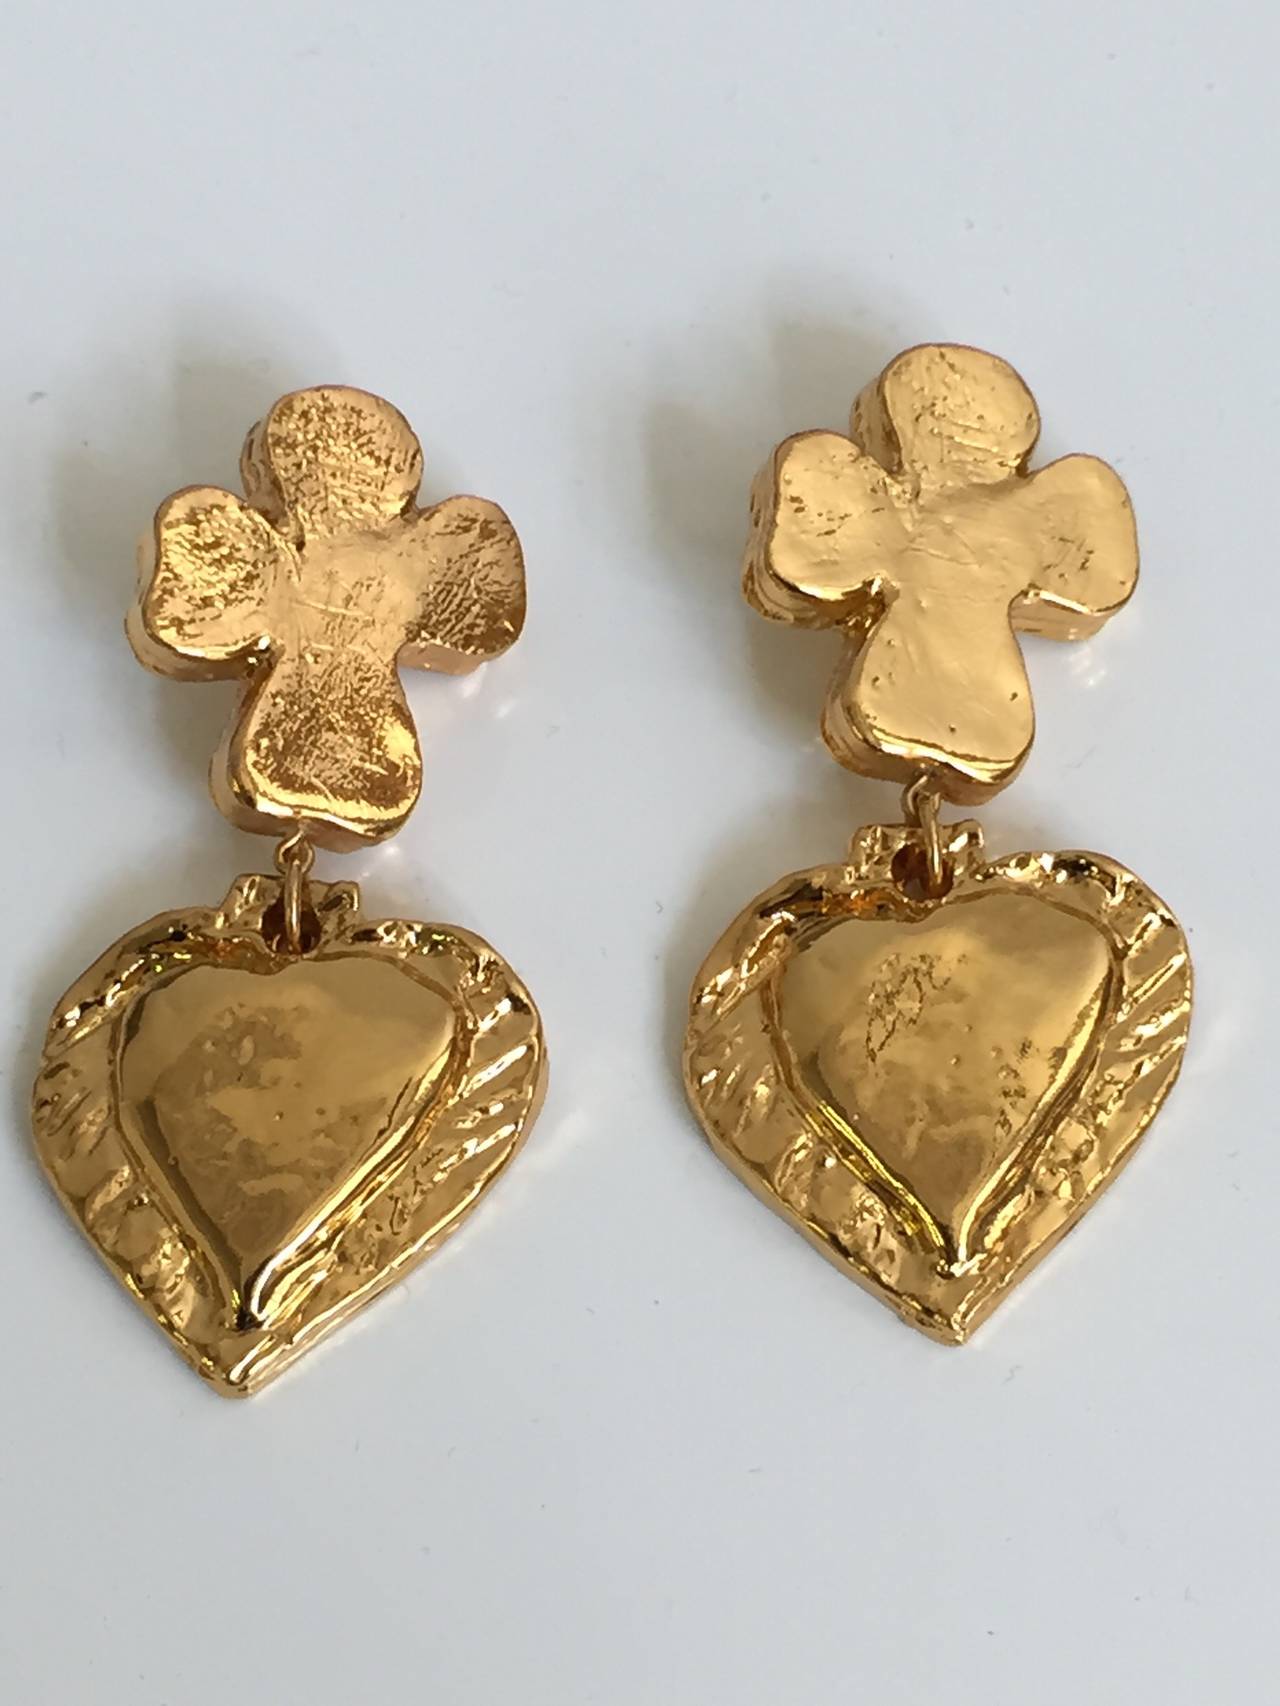 Christian Lacroix 80s Gold Clip On Earrings At 1stdibs 80s Gold Earrings